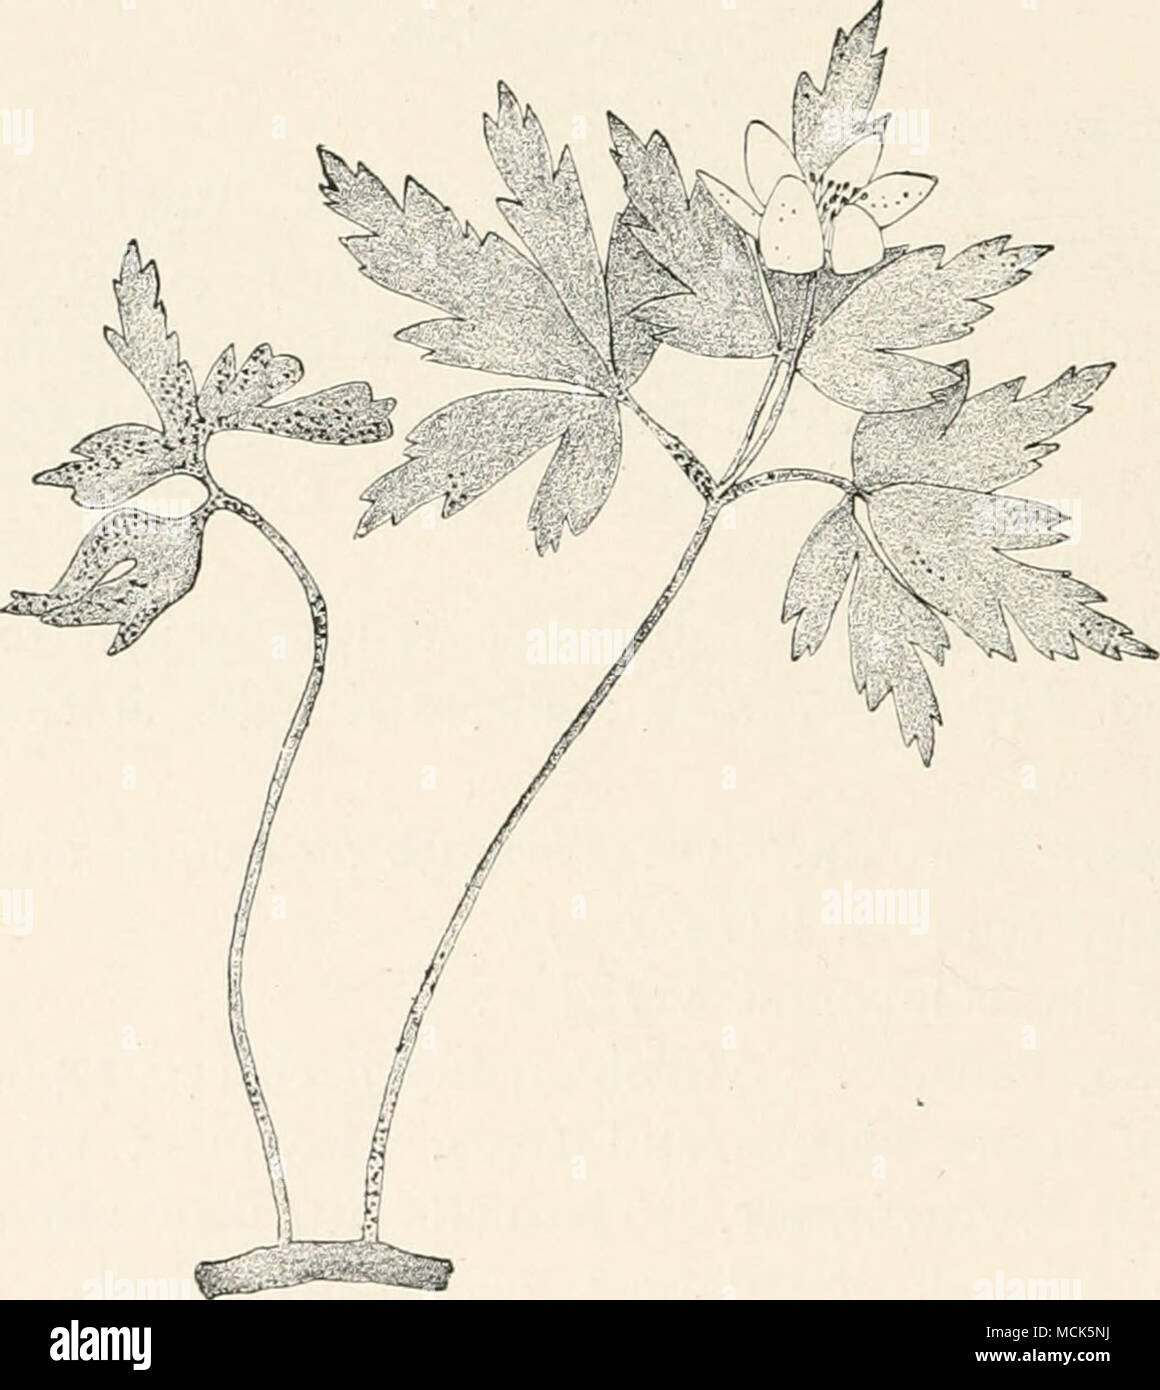 . FiG. 27.—Synchytriv.m anemones. The sporocarps form black points on leaves, petioles and perianth of the Anemone ; the laminae are also stunted and distorted, (v. Tubeuf del.) scens, attacking stems, leaves, or flowers, and forming eruptions whose cells contain a red sap. In very bad cases, crumpling and swelling of attacked organs occur. Stock Photo